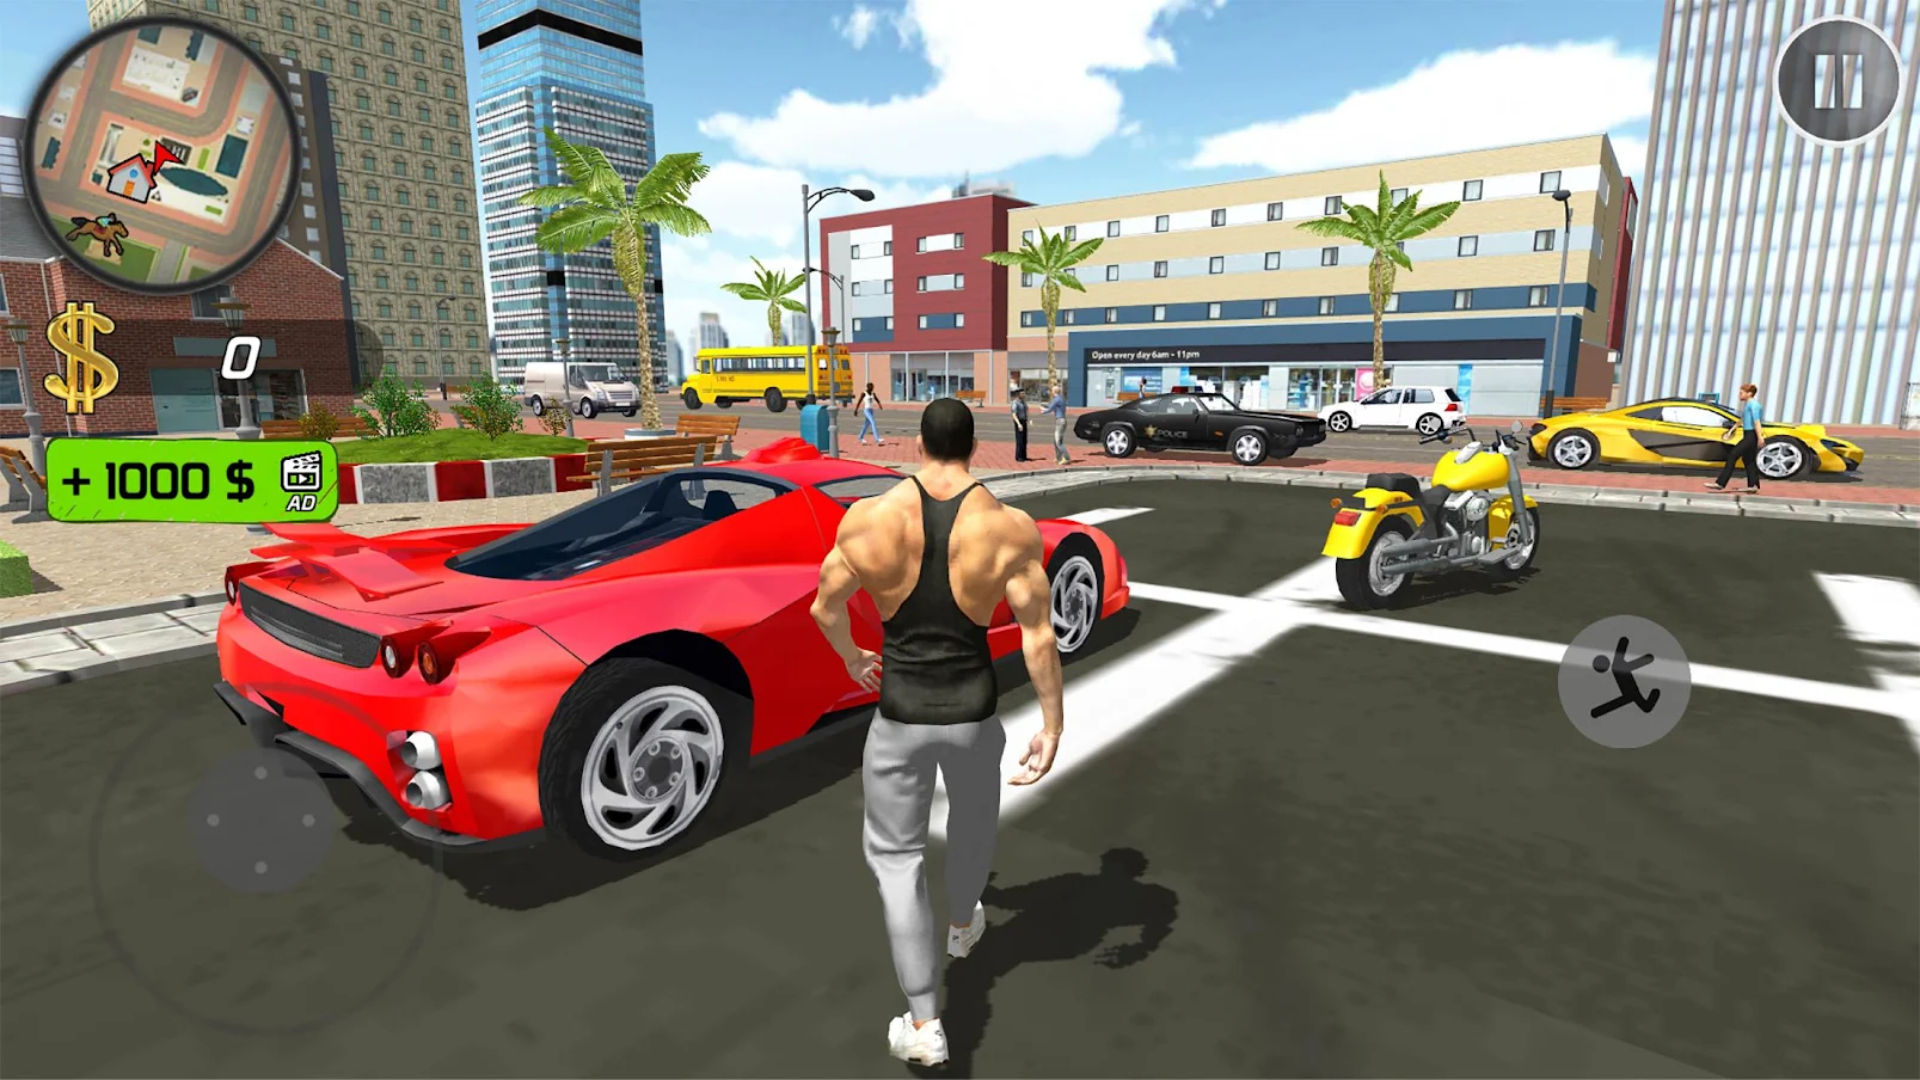 5 best games like GTA 5 for iOS devices in 2021